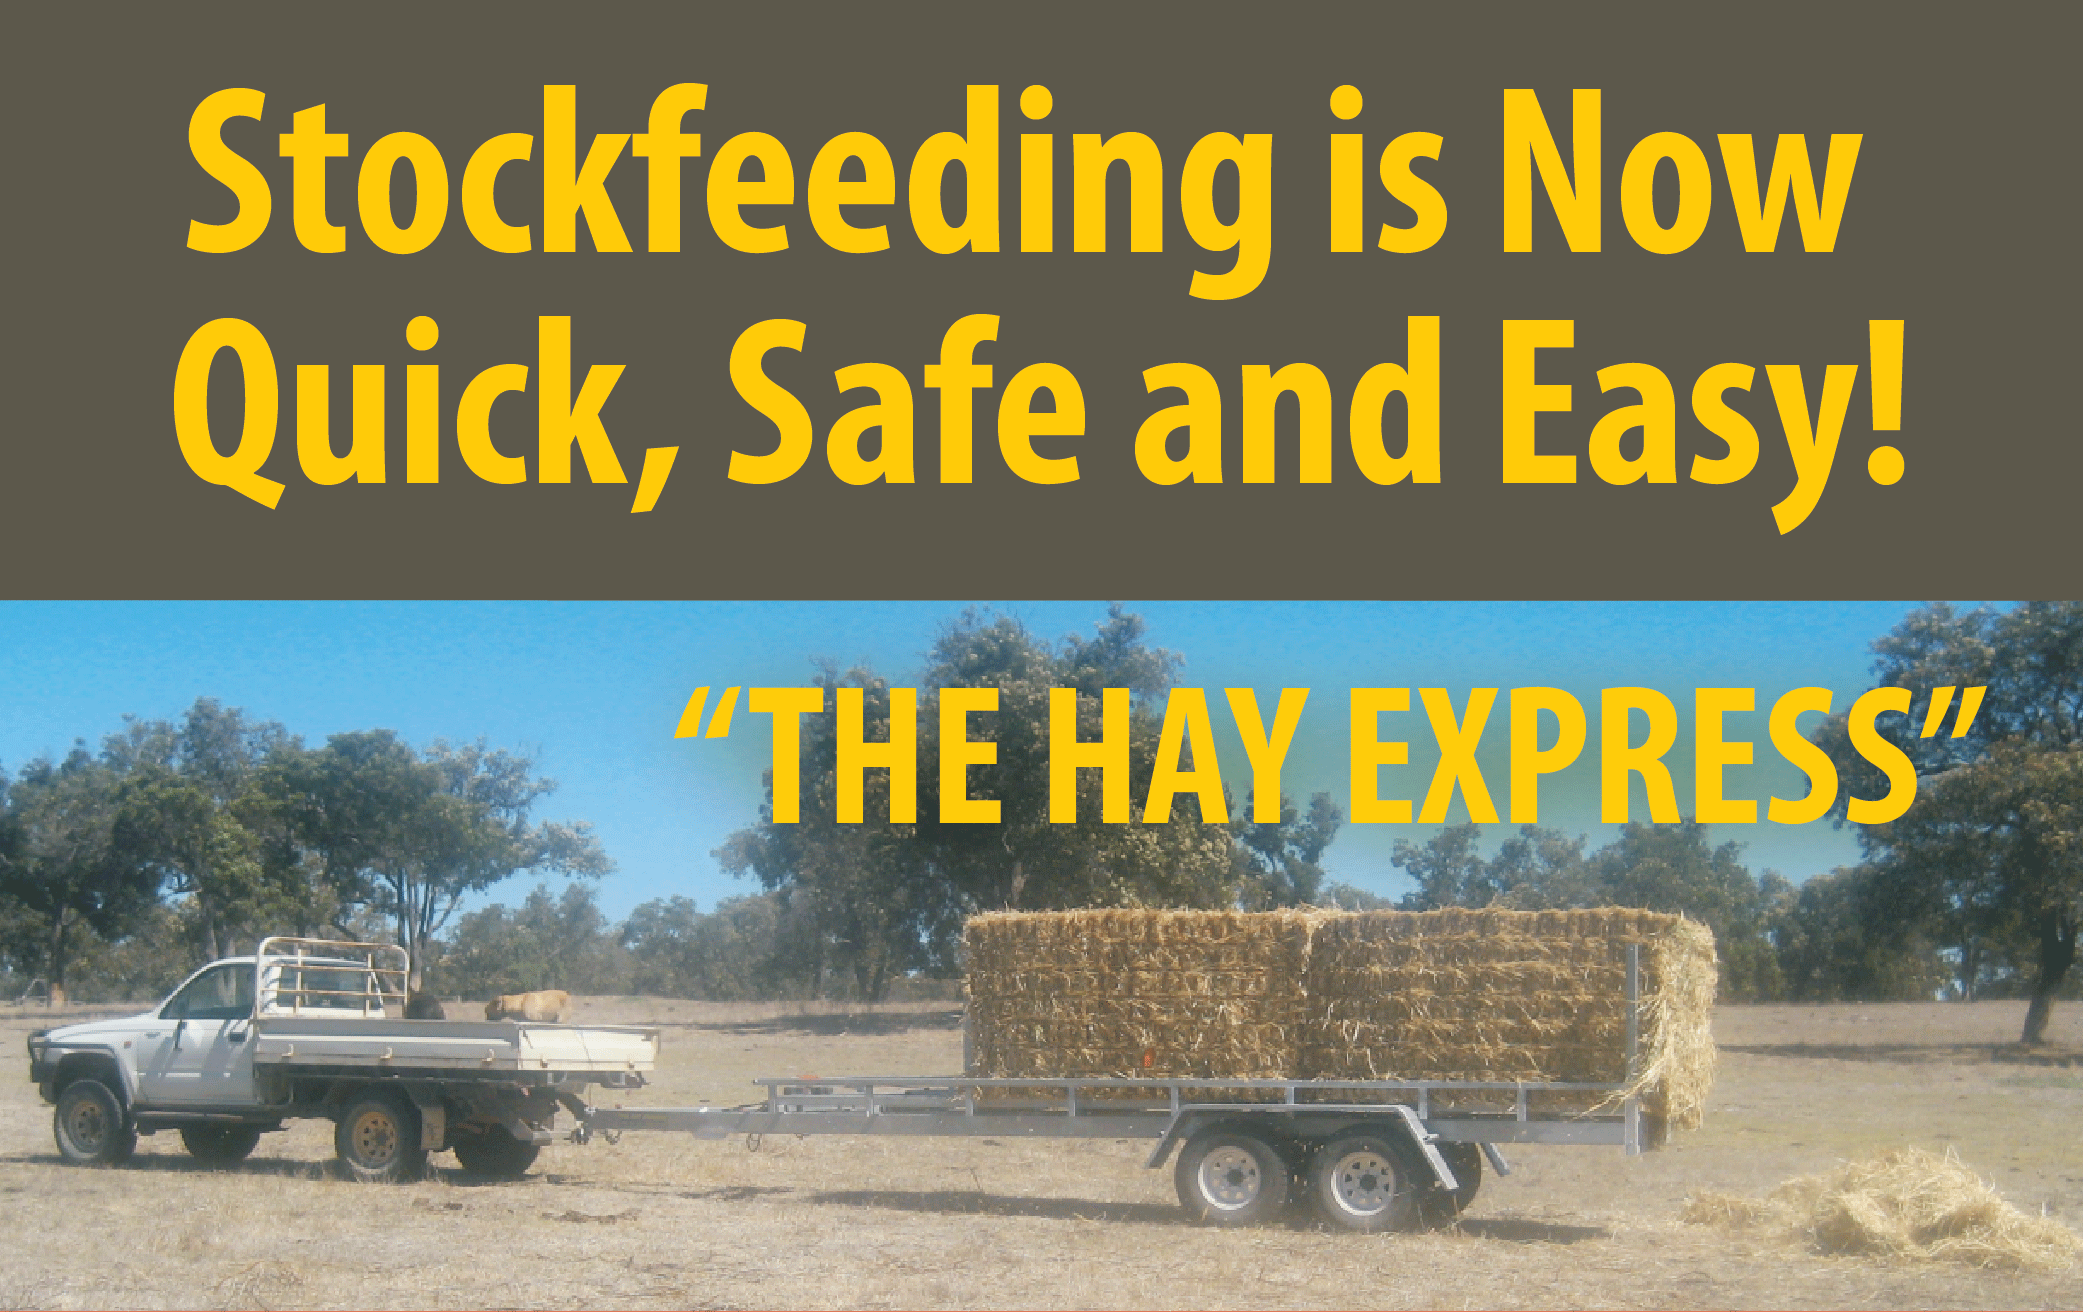 The Hay Express